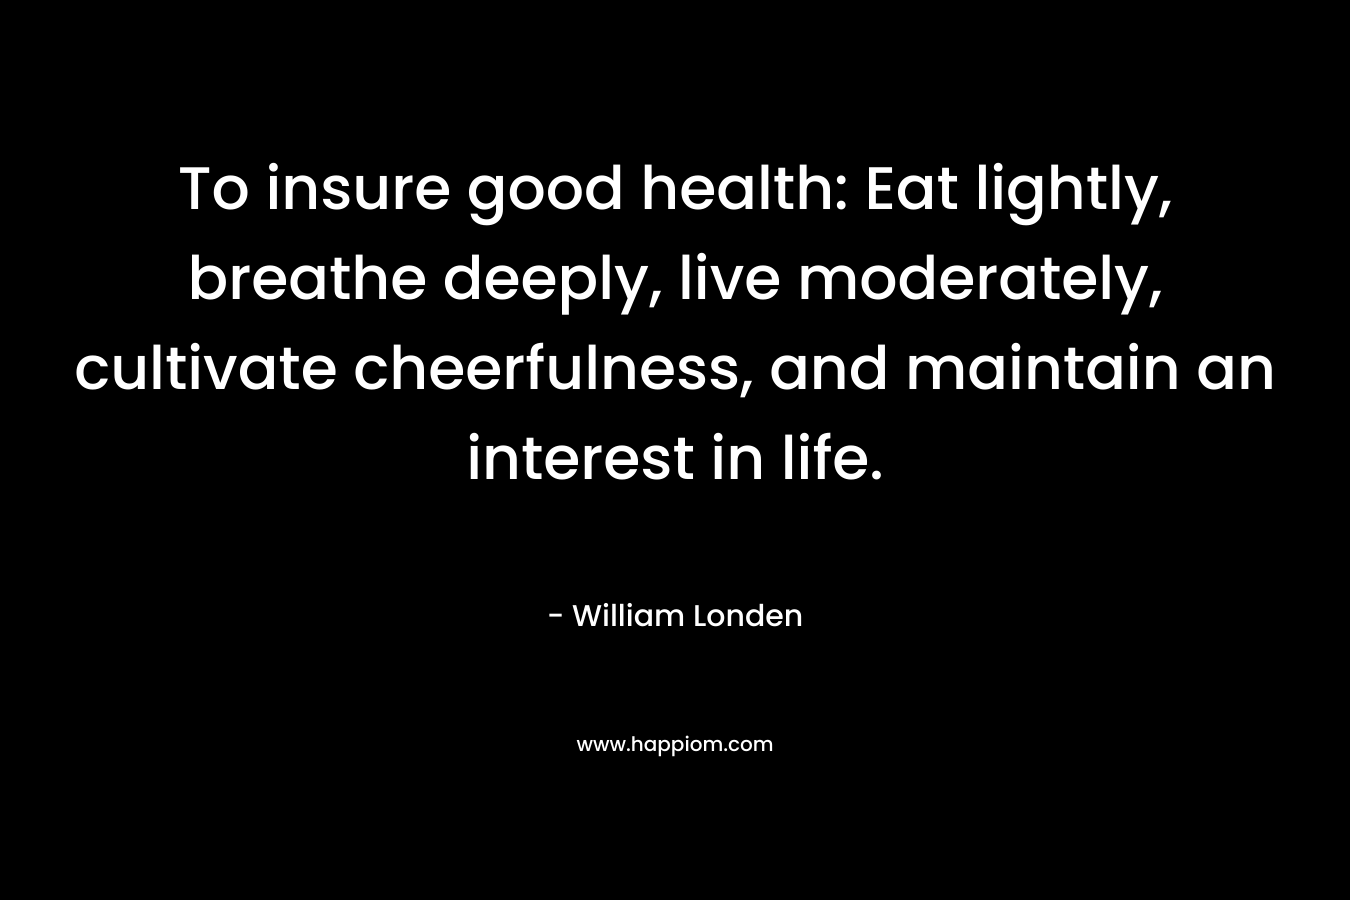 To insure good health: Eat lightly, breathe deeply, live moderately, cultivate cheerfulness, and maintain an interest in life. – William Londen